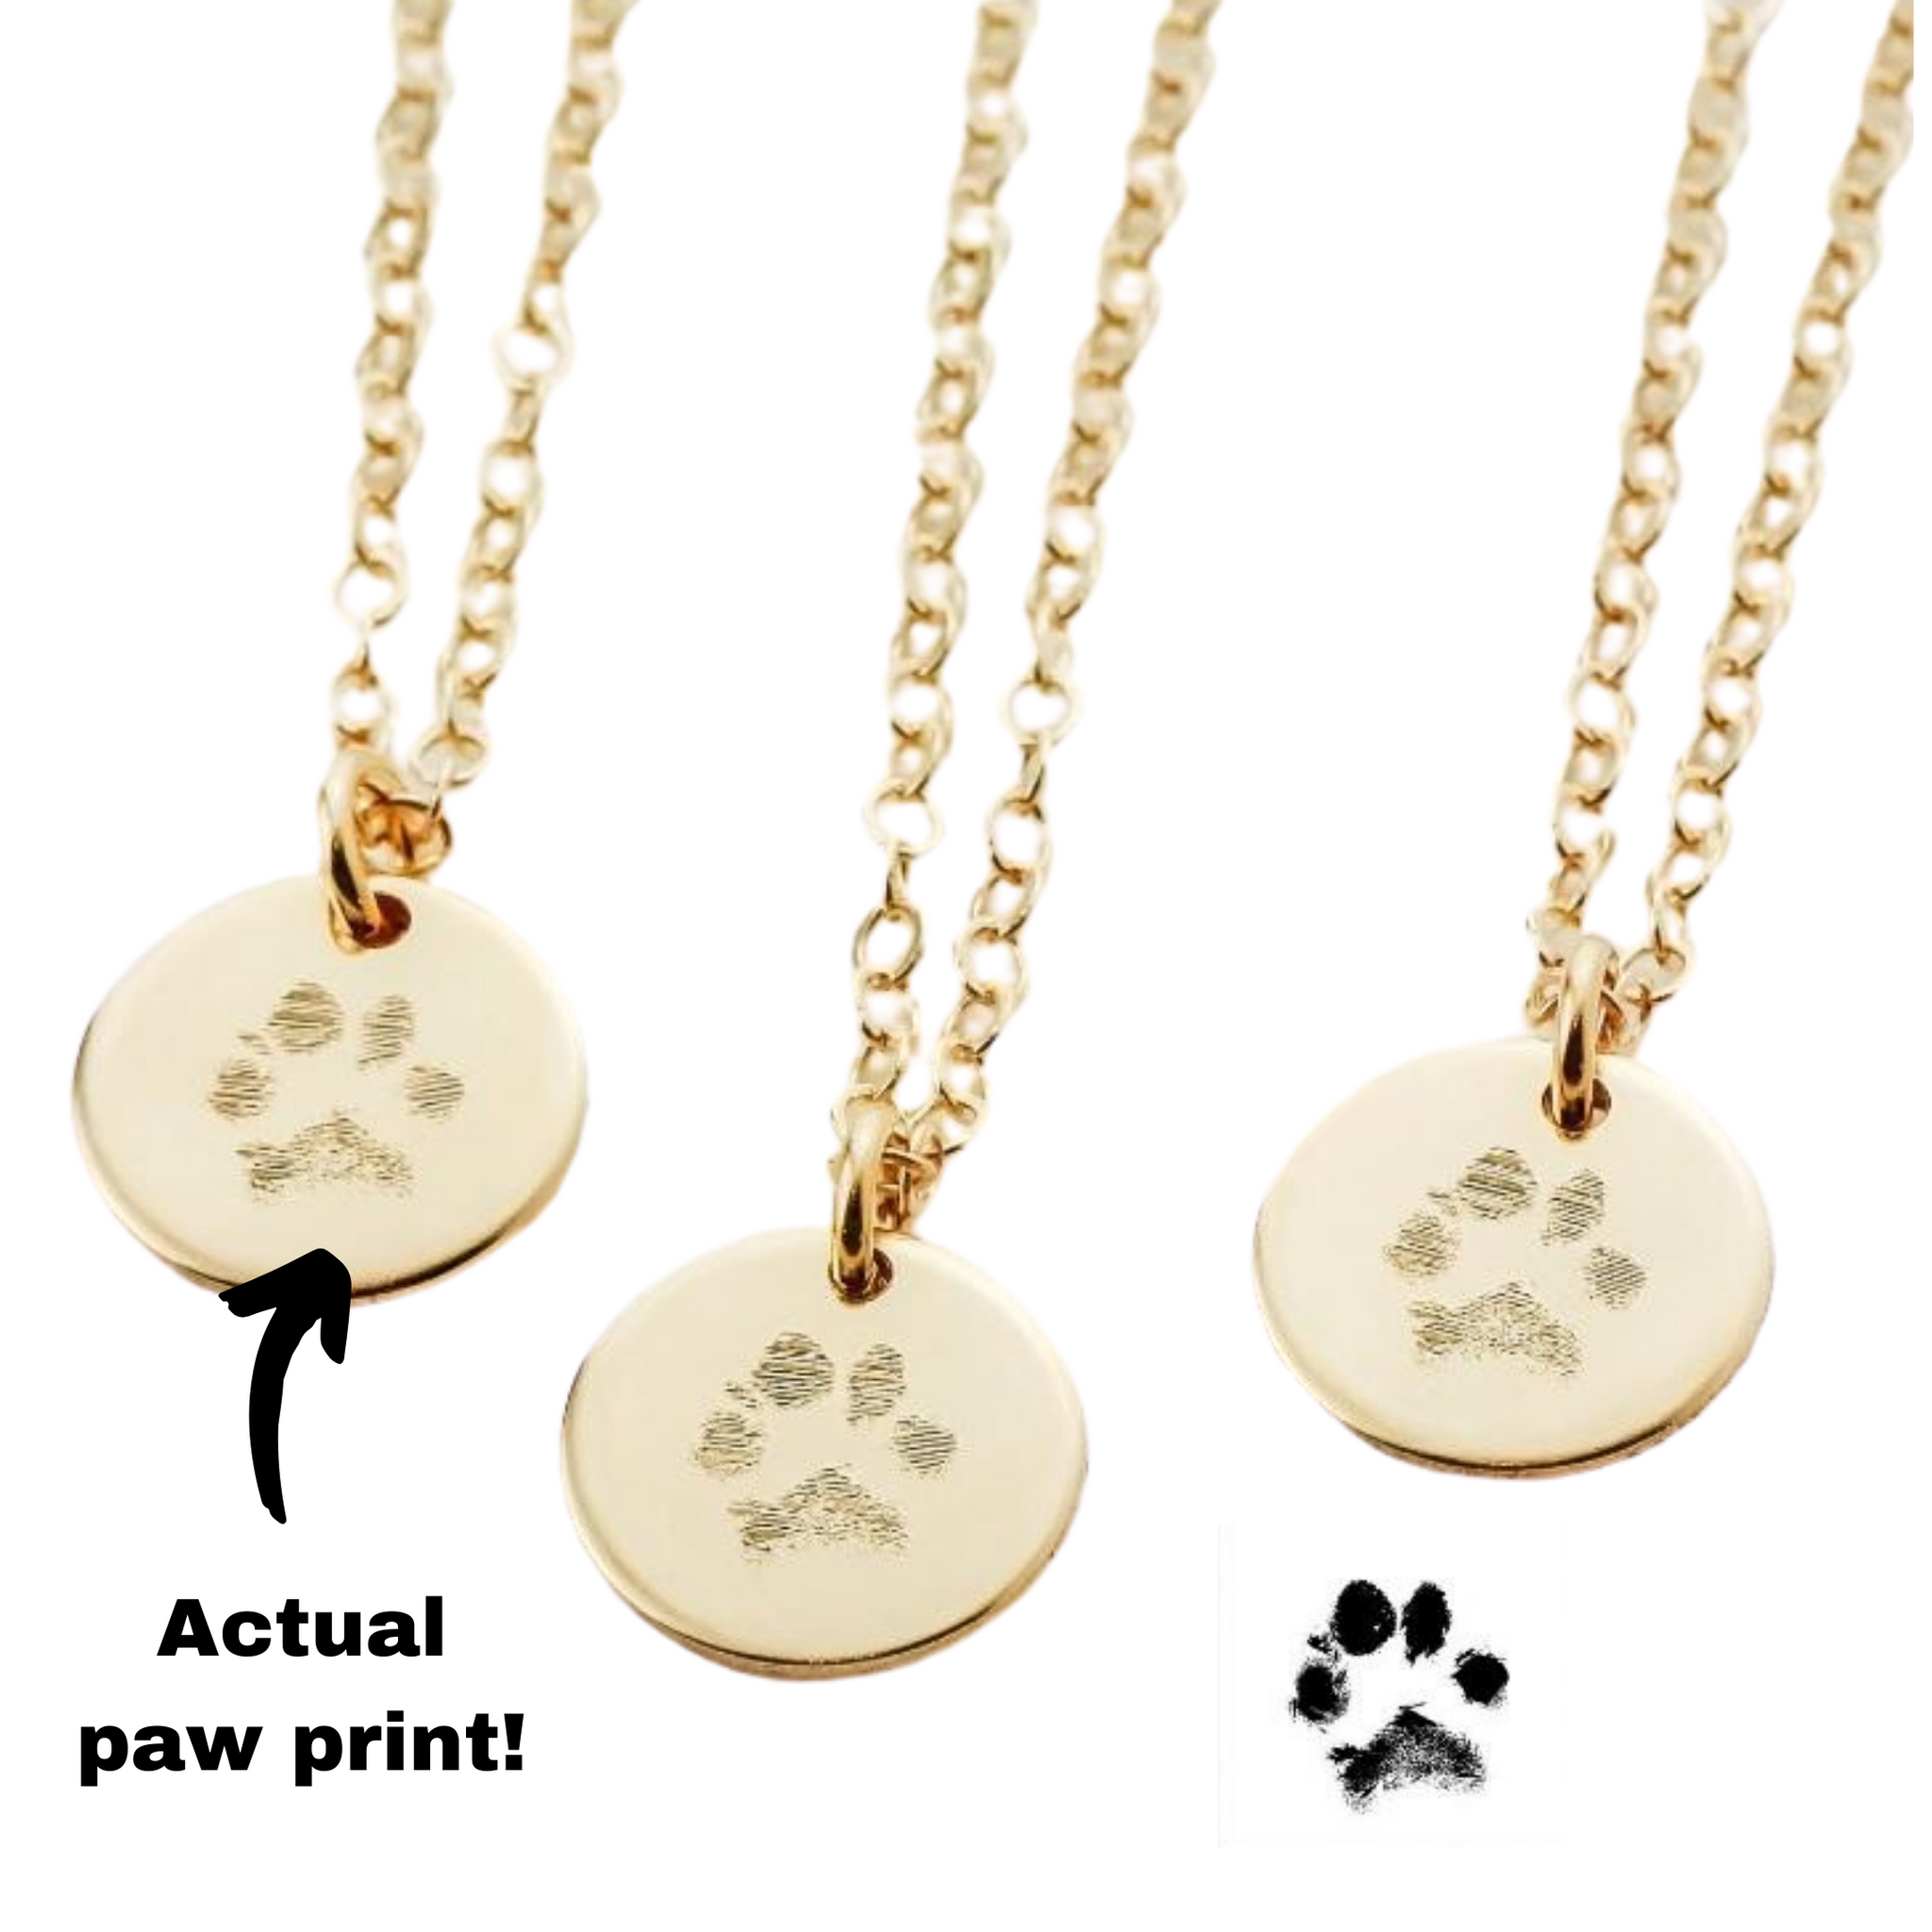 Your pet's actual paw or nose print custom personalized pendant necklace  Sterling silver or 14k gold filled. Various diameters available